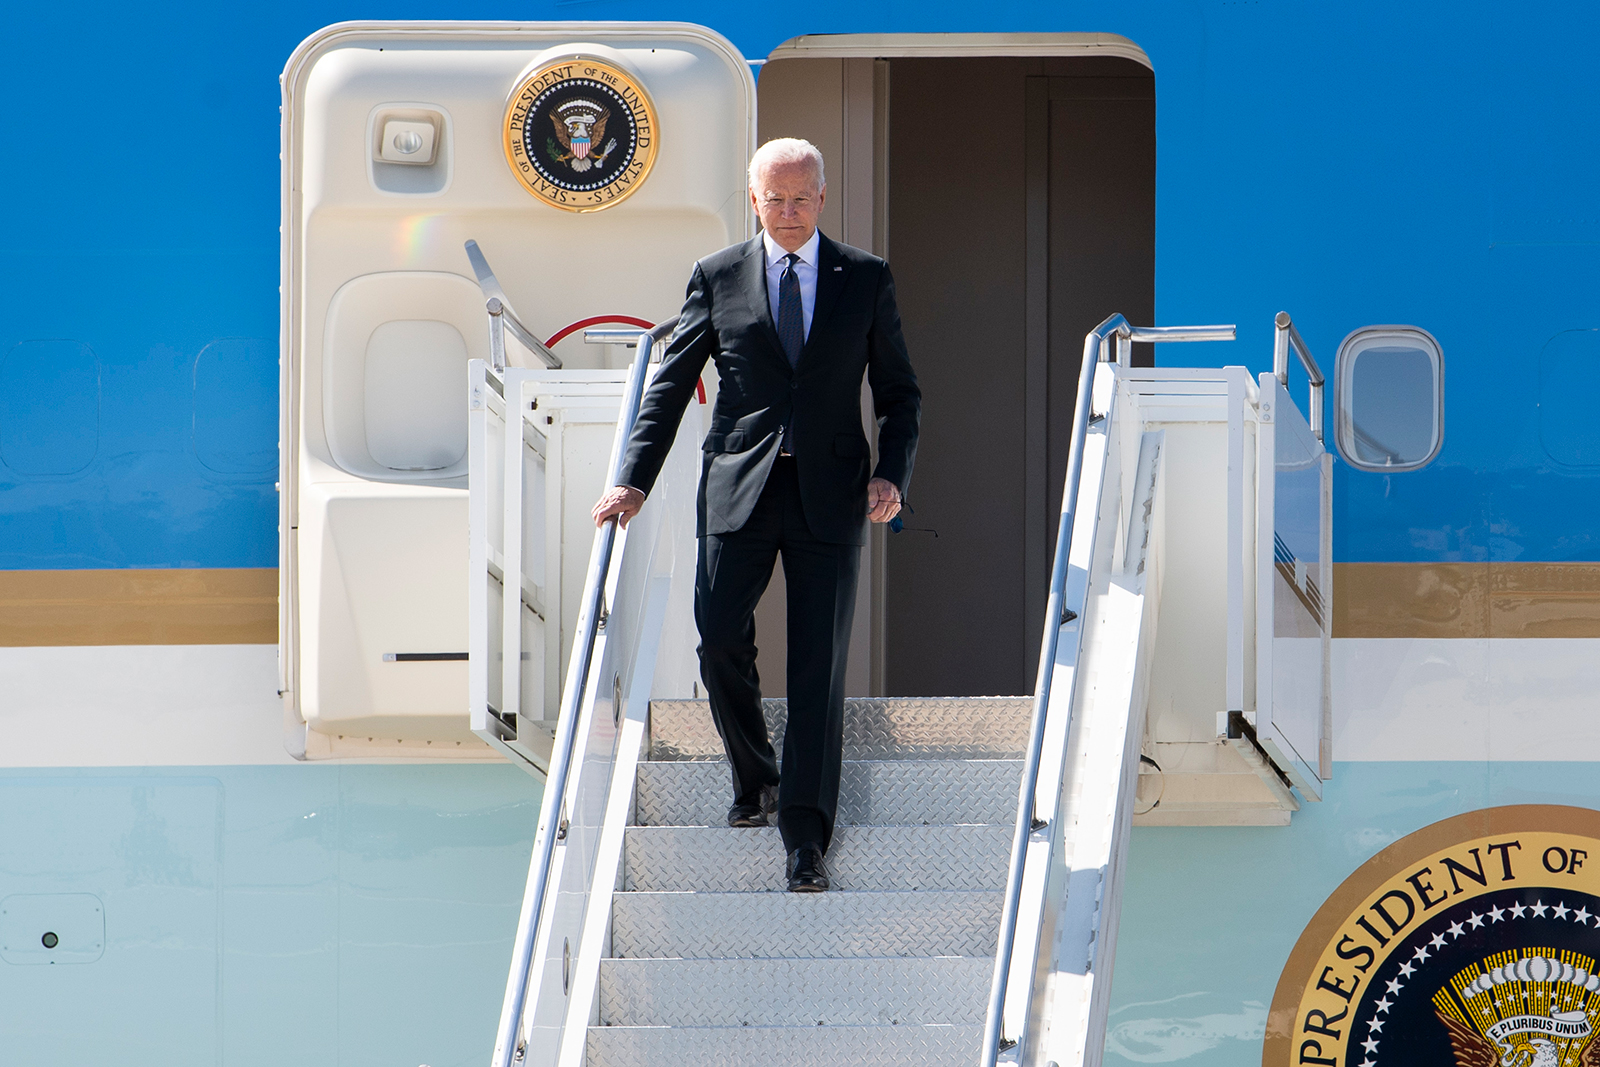 US President Joe Biden disembarks from Air Force One after arriving in Geneva, one day prior to the US - Russia summit on June 15, in Geneva, Switzerland.